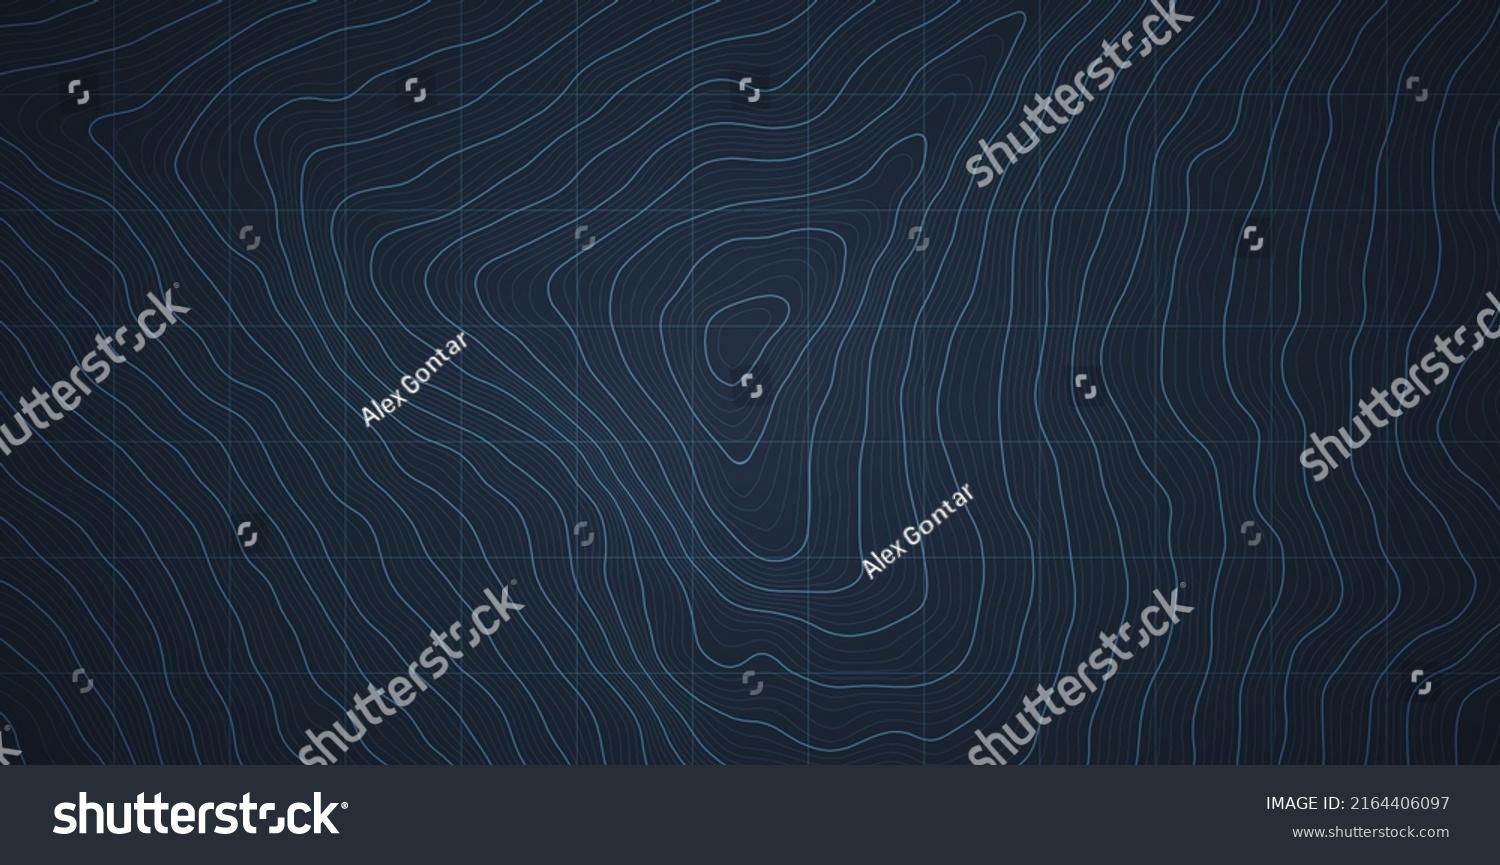 SVG of Vector Abstract Topographic Map Conceptual Pale Dark Blue Wallpaper. Geographic Topology Structure With Depth Elevation. Topography Relief Territory Cartography Art Wide Background svg